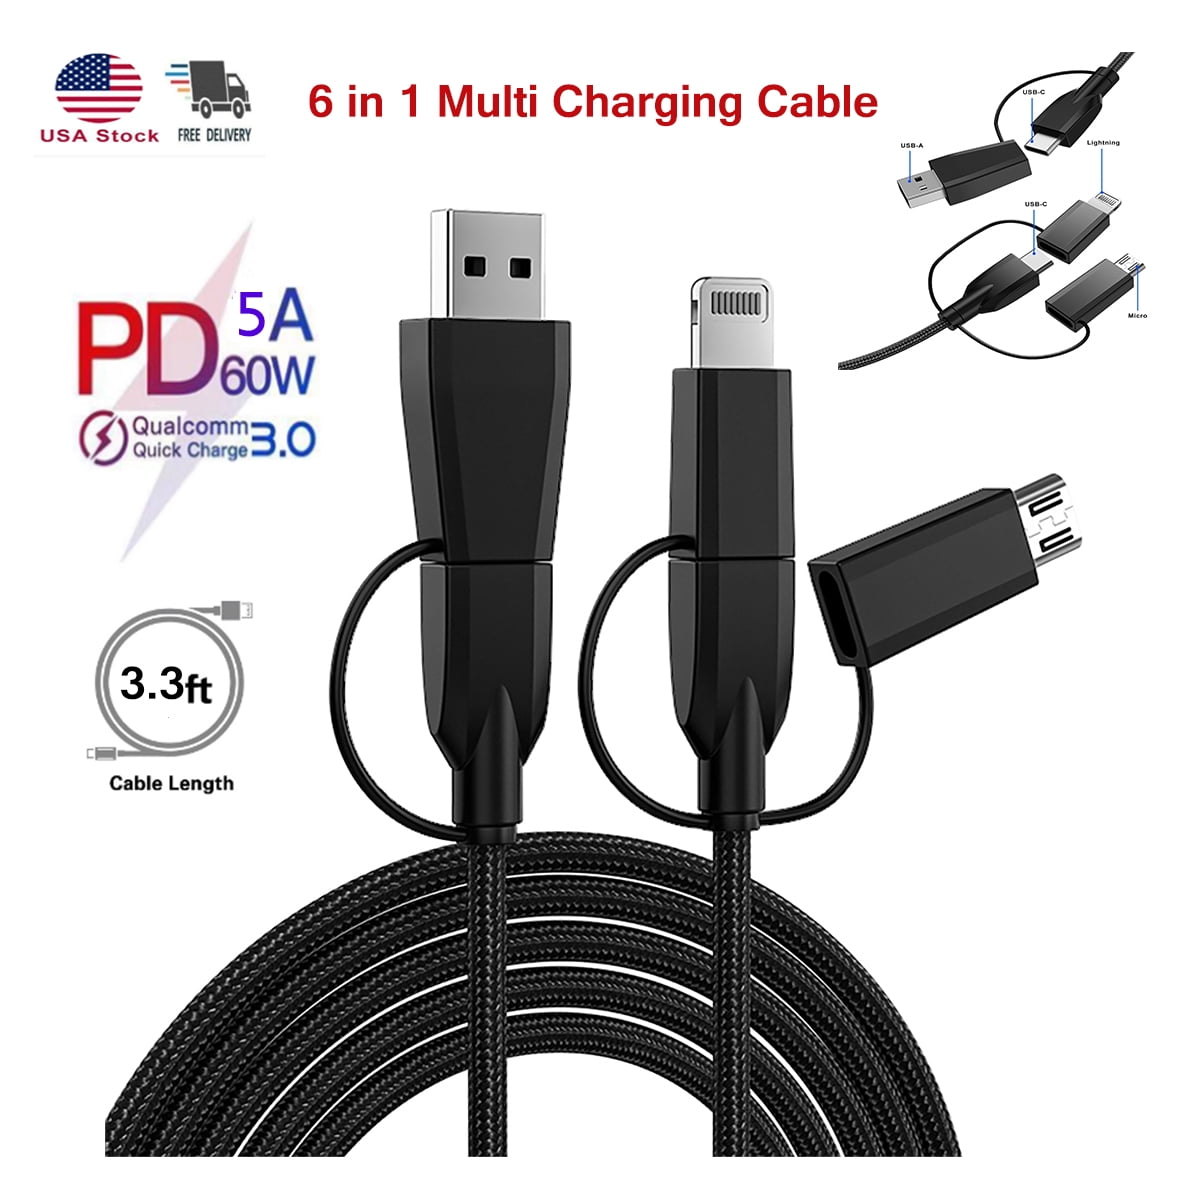 2pcs 3 in 1 USB Data Cable Multi Charger Cable Portable Cloth Data Line for Home Office 